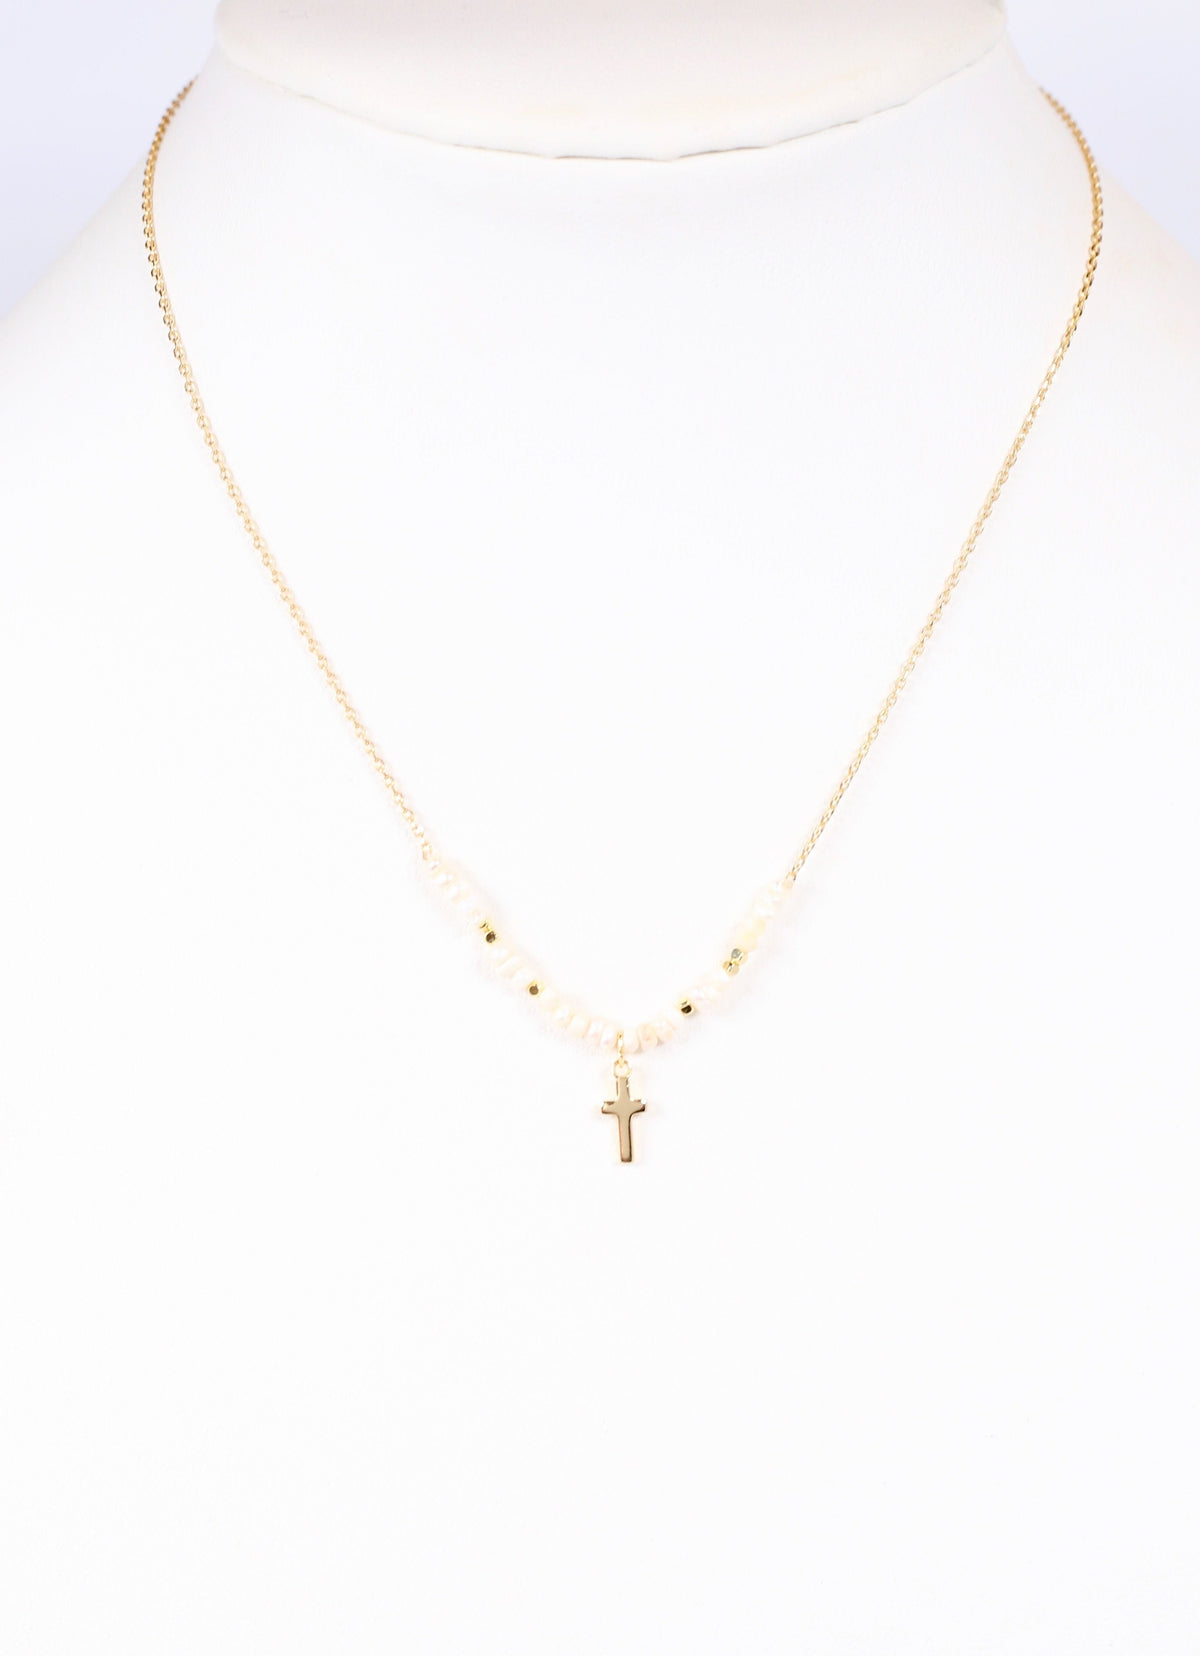 Keble Cross and Pearl Necklace GOLD - Caroline Hill